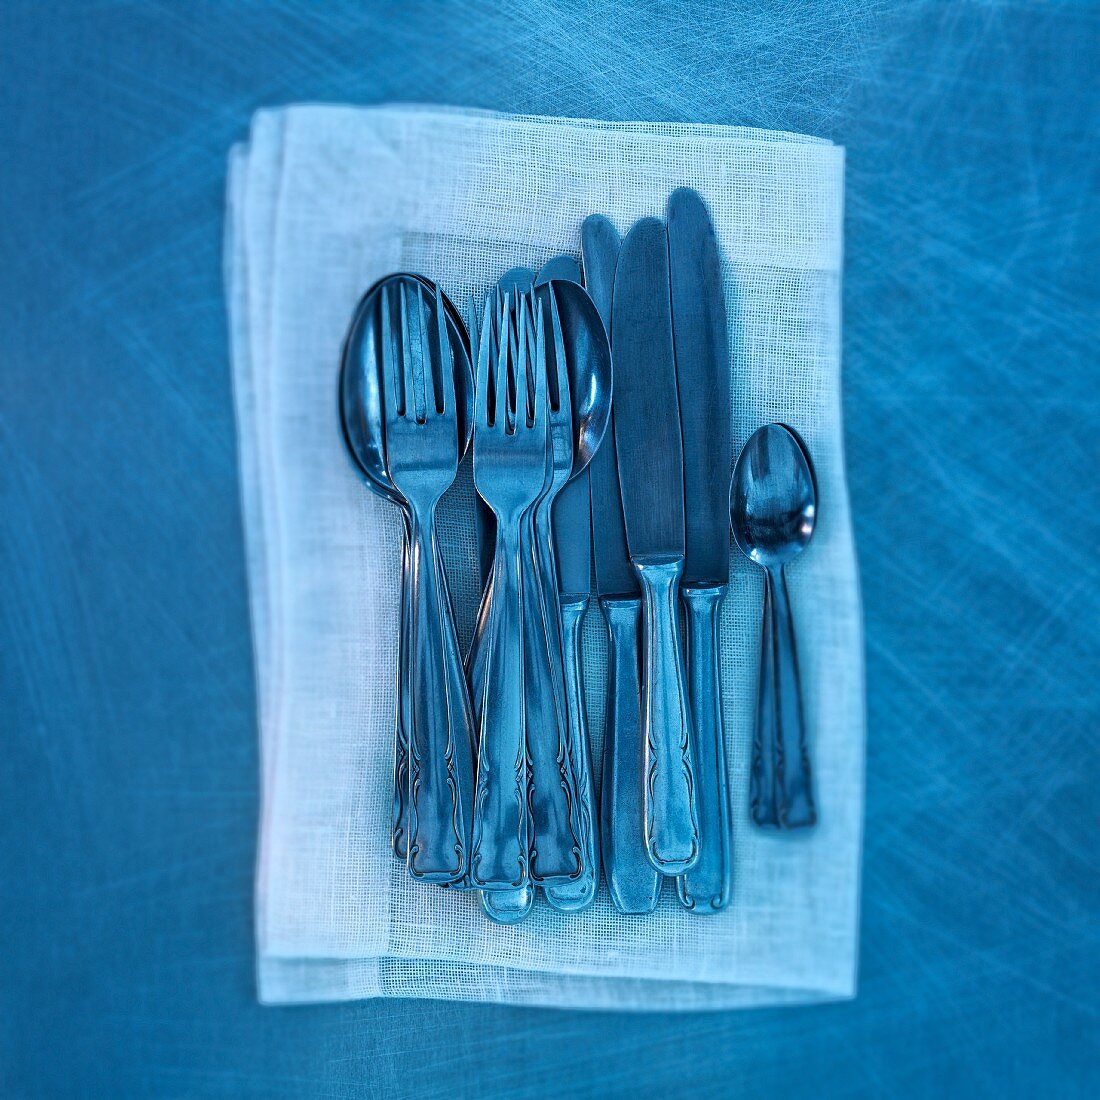 Old cutlery on a linen napkin in blue